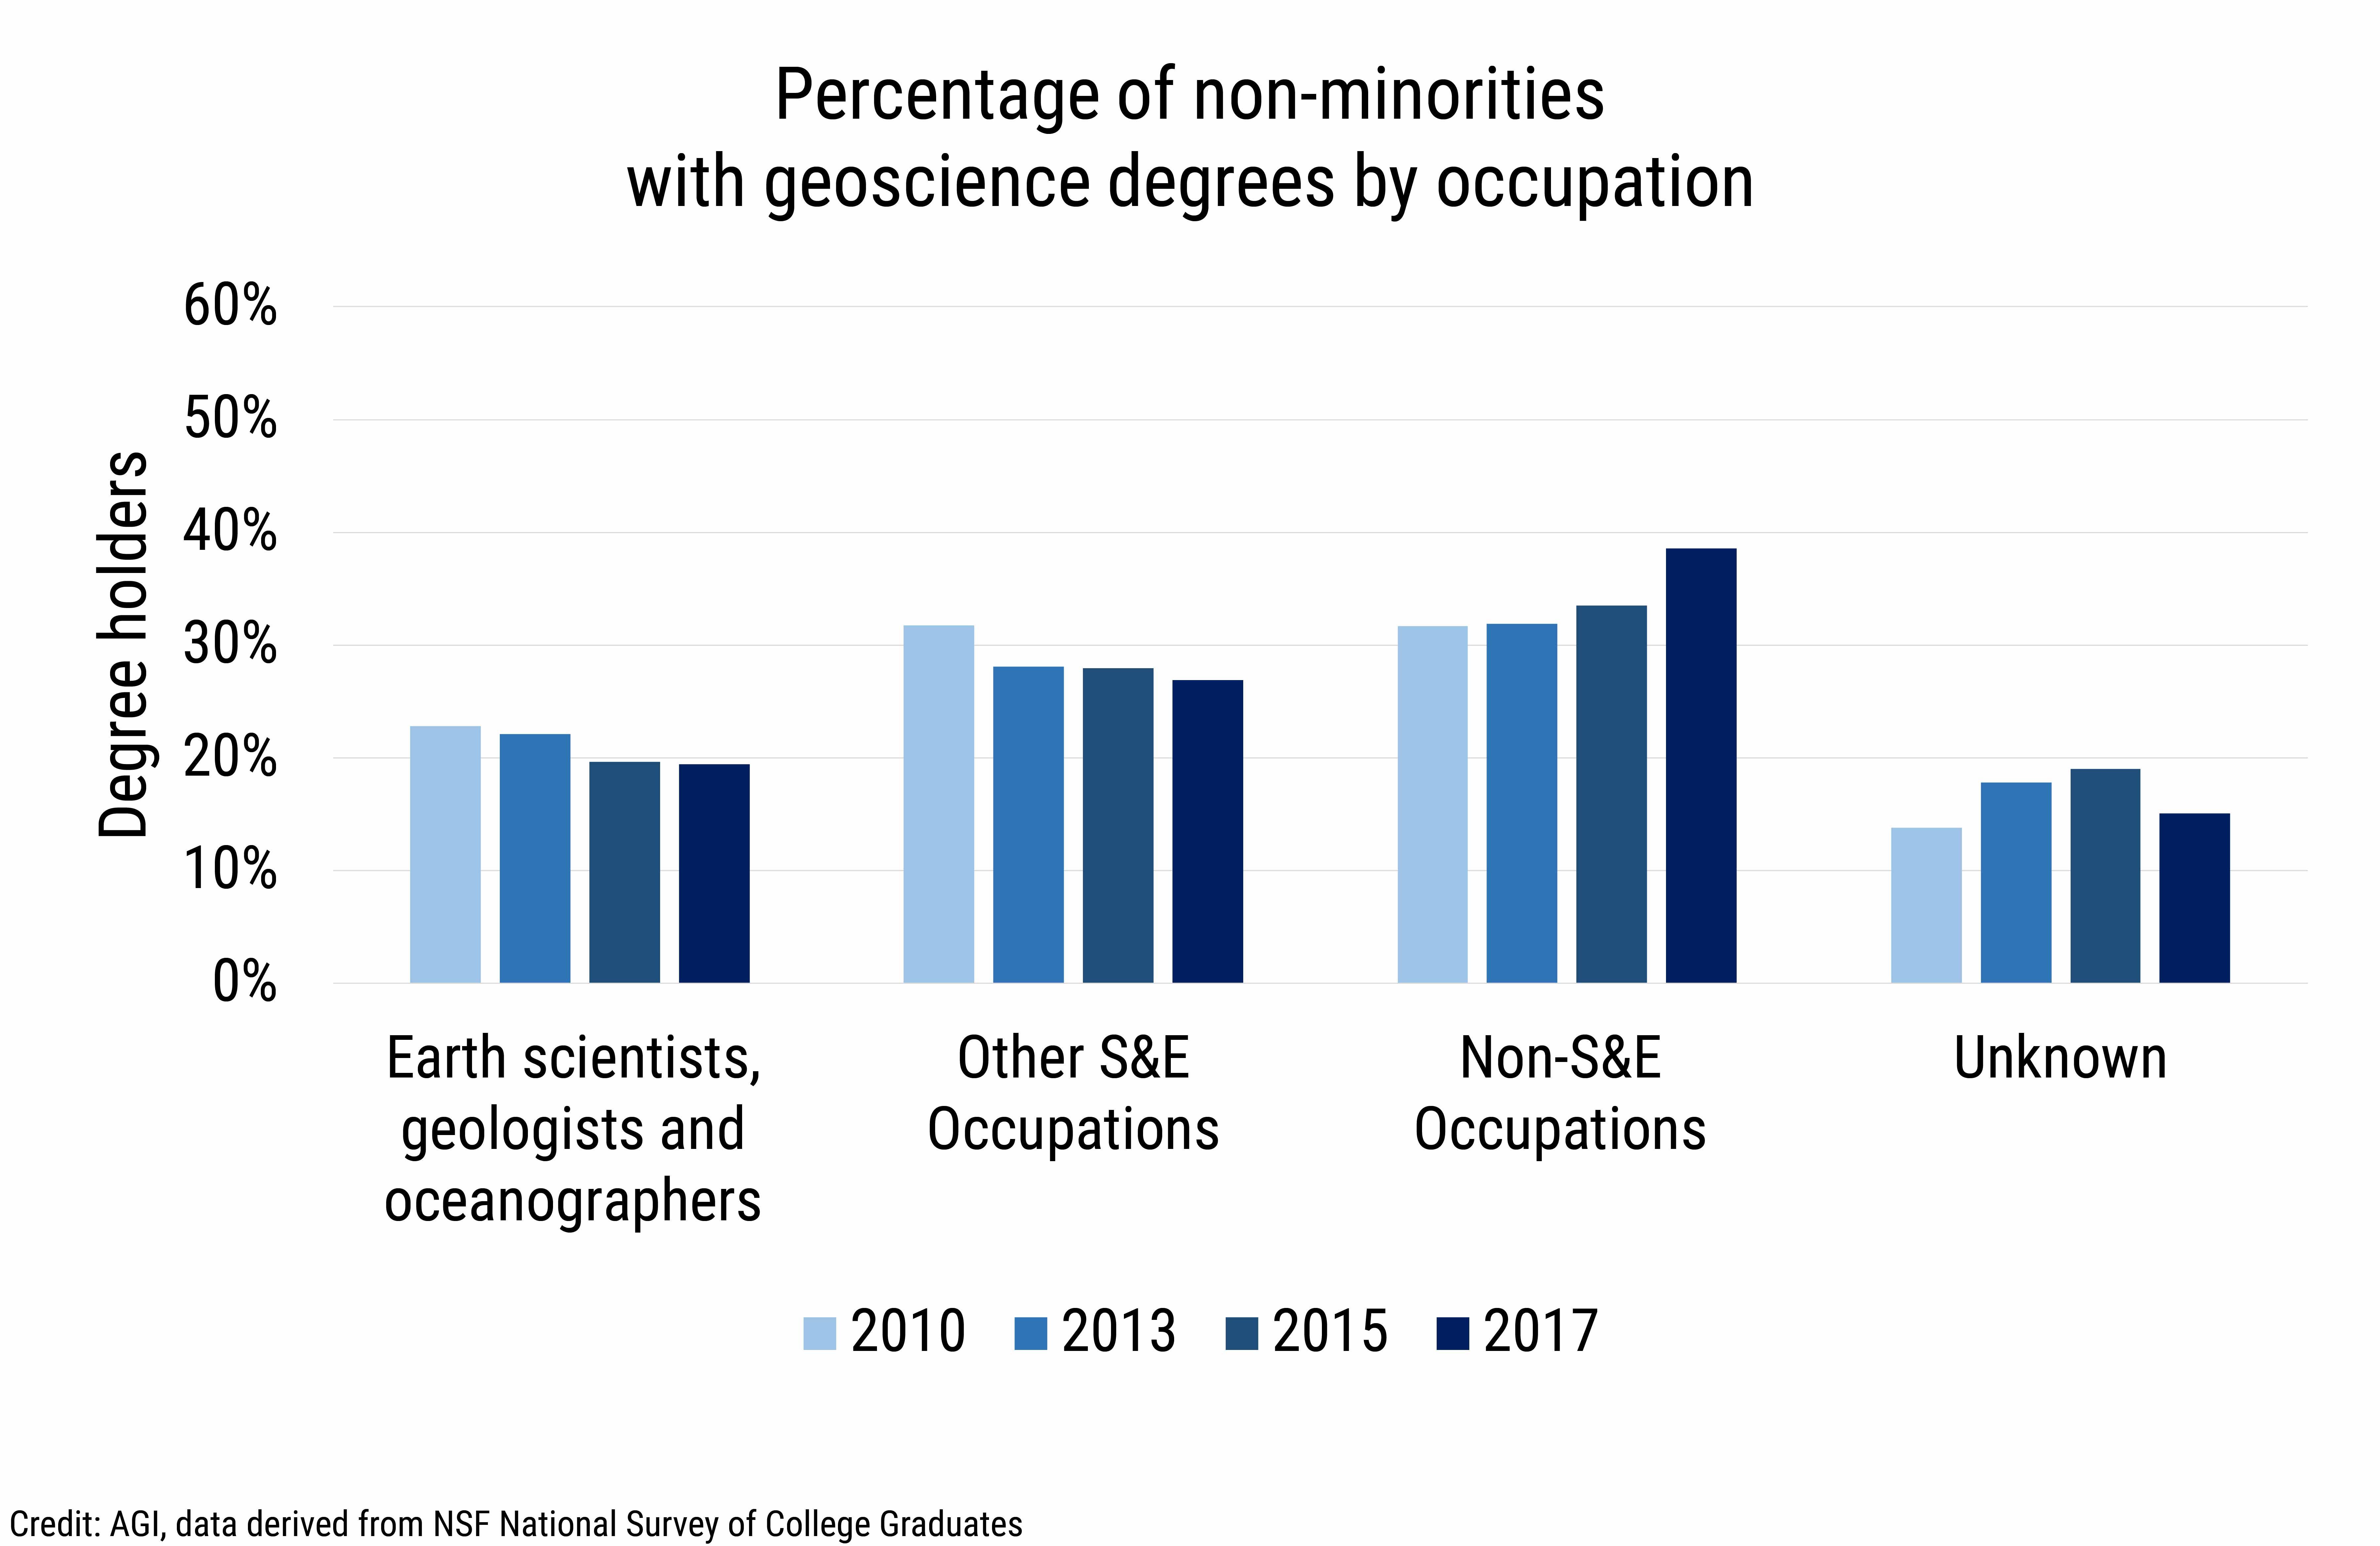 DB2020-023 chart15-Percentage of non-minorities with geoscience degrees by occupation (Credit: AGI, data derived from NSF National Survey of College Graduates)